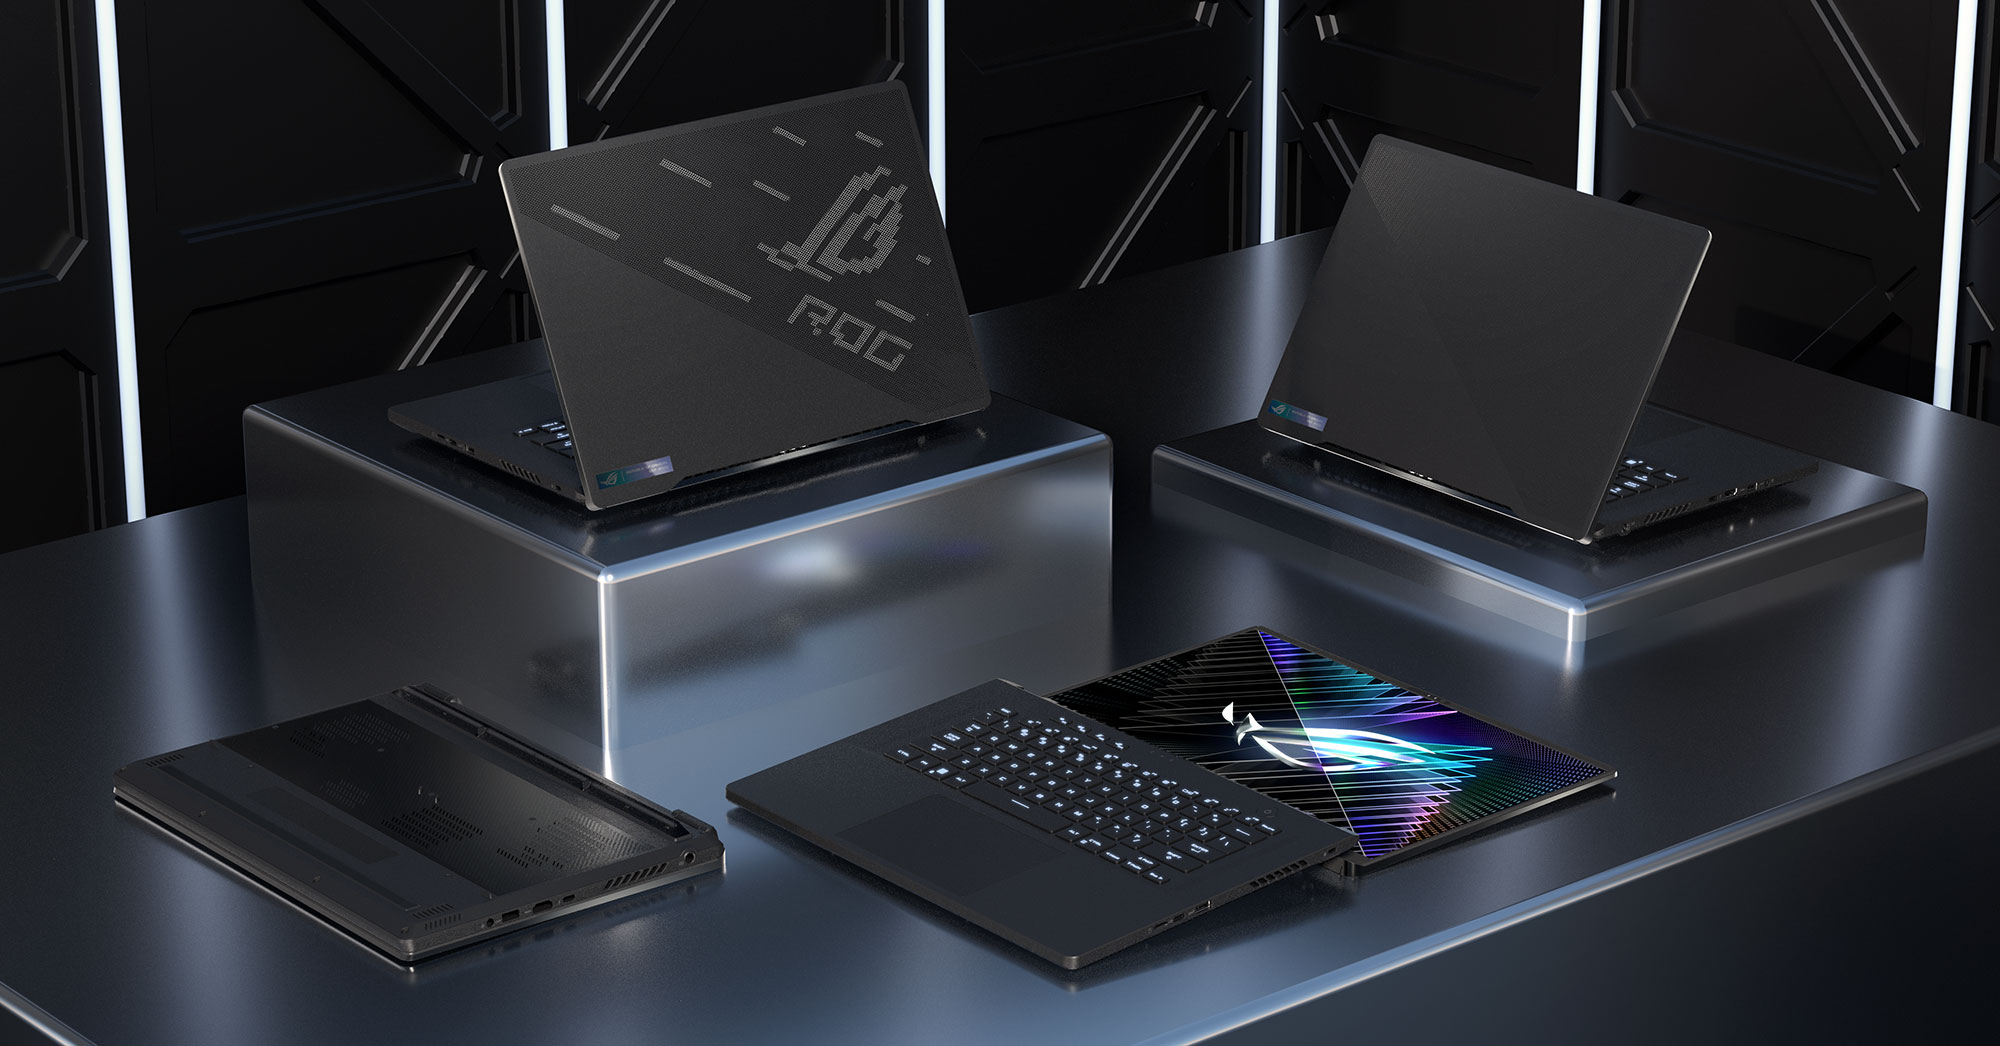 2023 generation of the Asus ROG Zephyrus M16